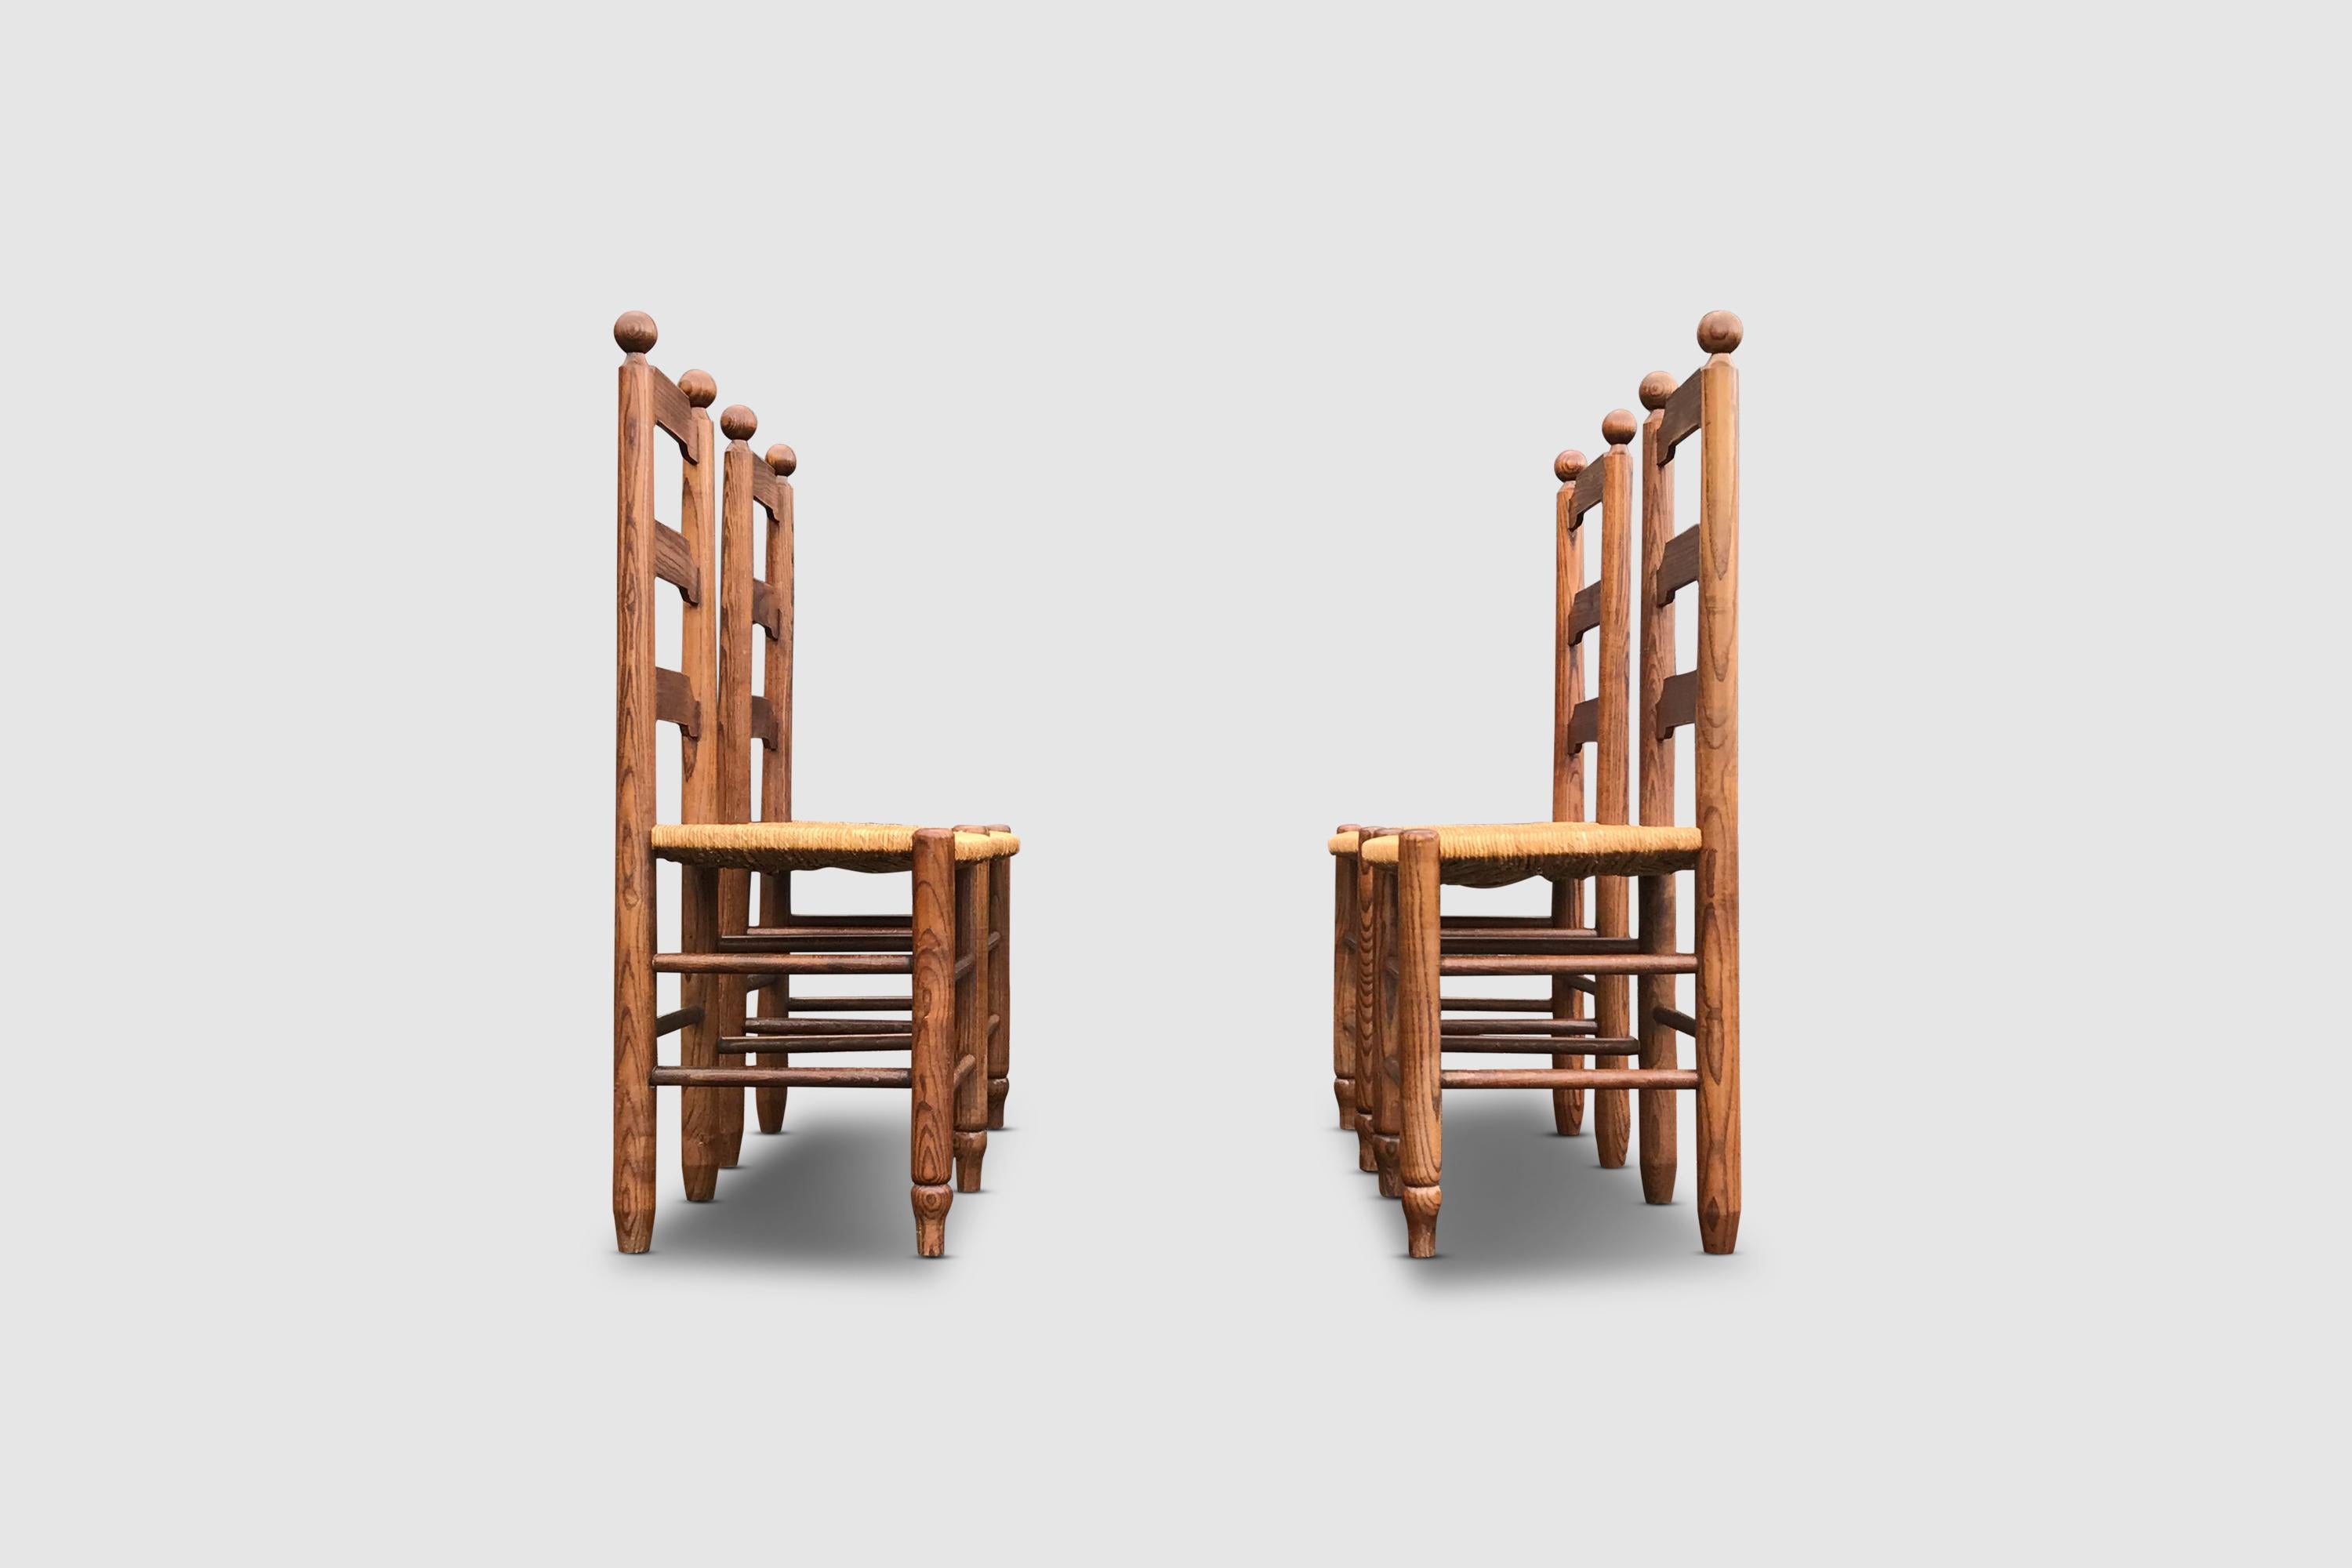 Set of rustic oak and wicker chairs by the French artisan furniture house Georges Robert.

The chairs have the typical carved knot design on top. The backrest is triple slatted and carved in traditional fashion. The chair has thick oak columns that